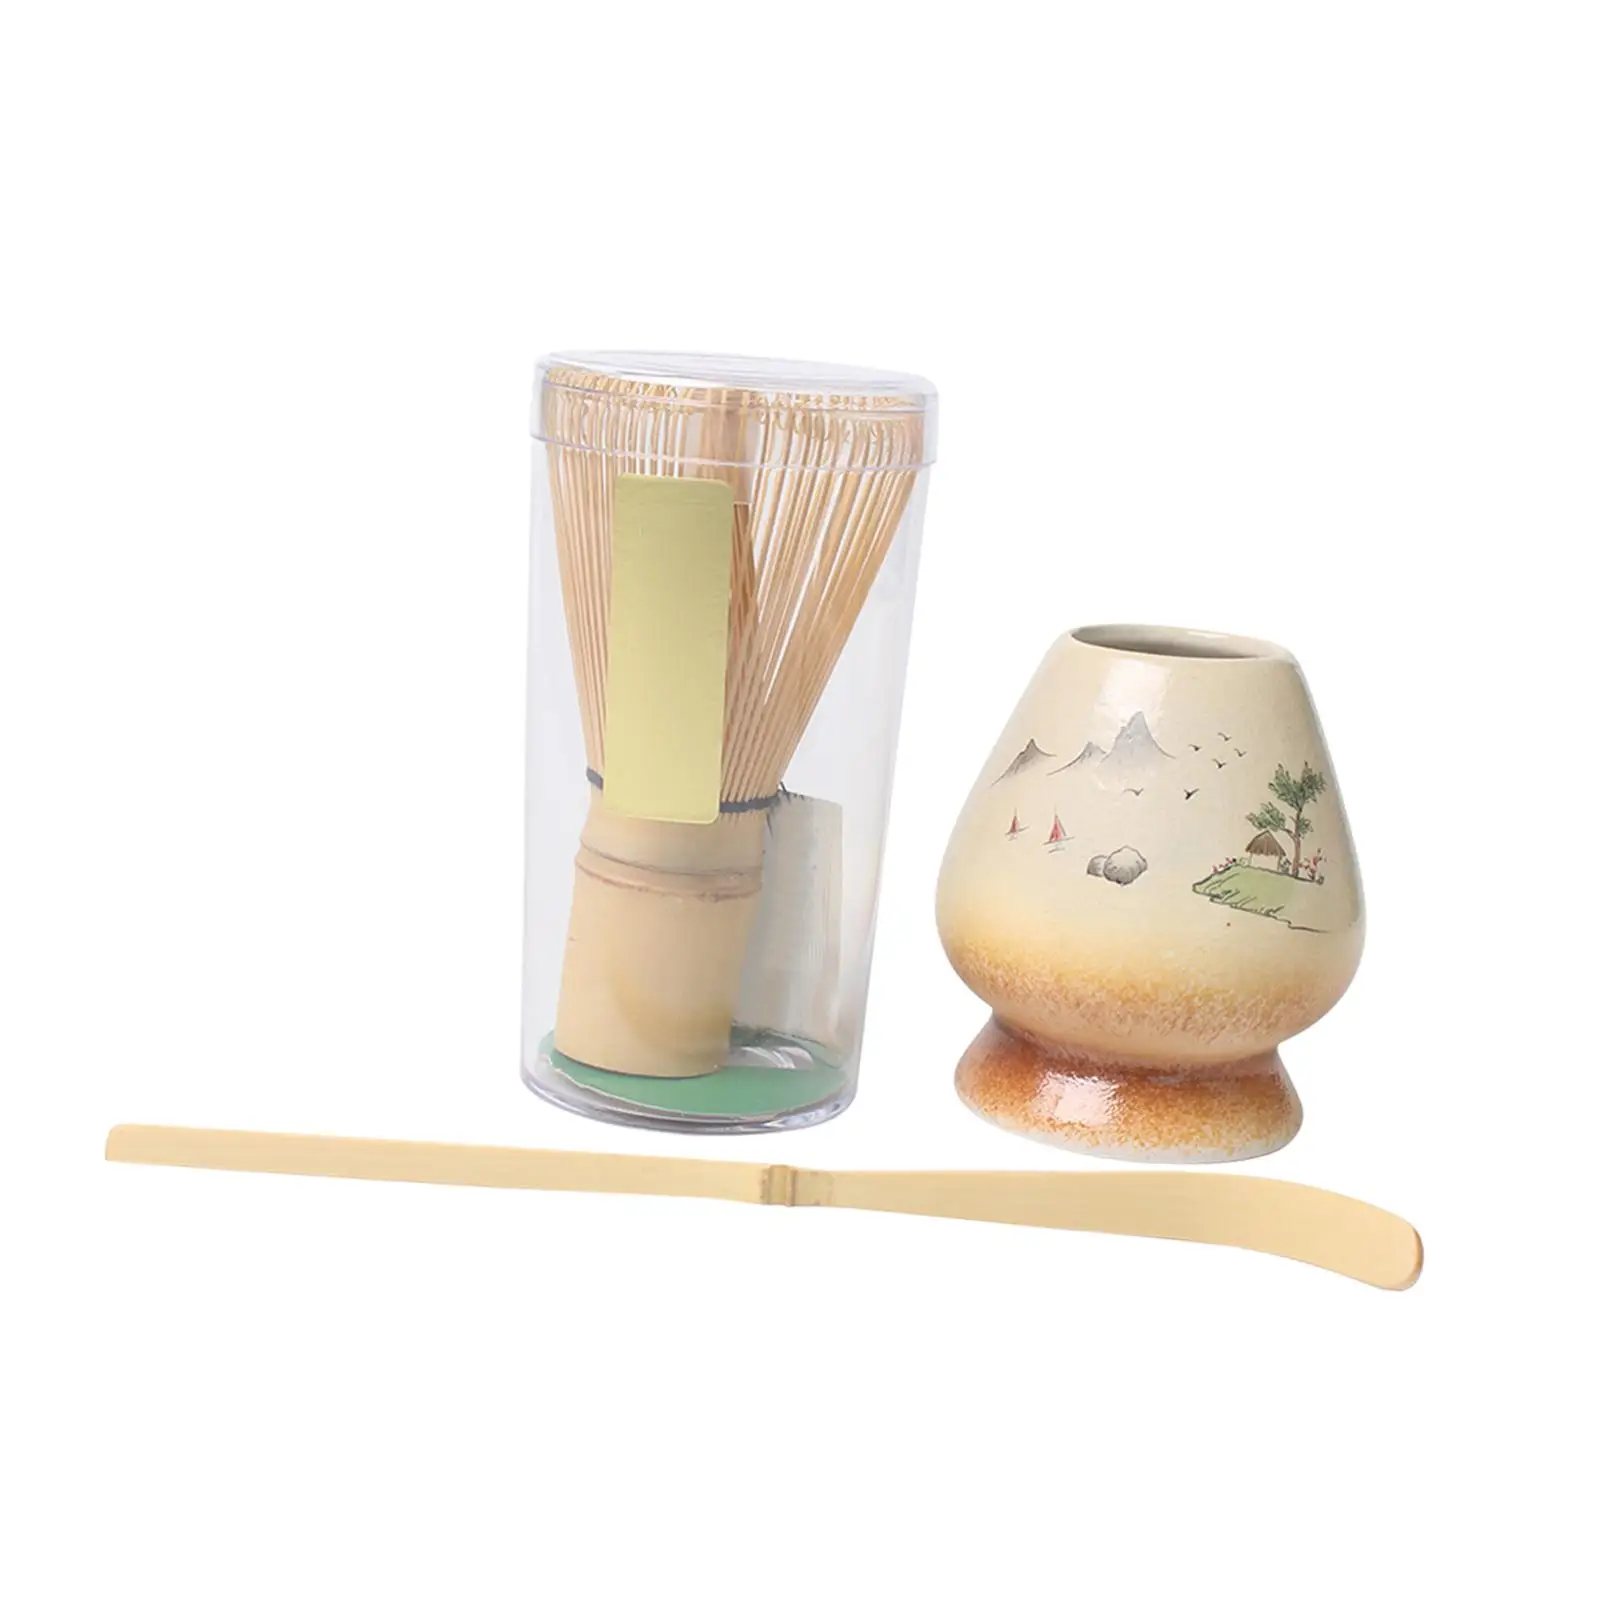 3x Traditional Matcha Whisk and Bowl Handmade Bamboo Whisk Matcha Set for